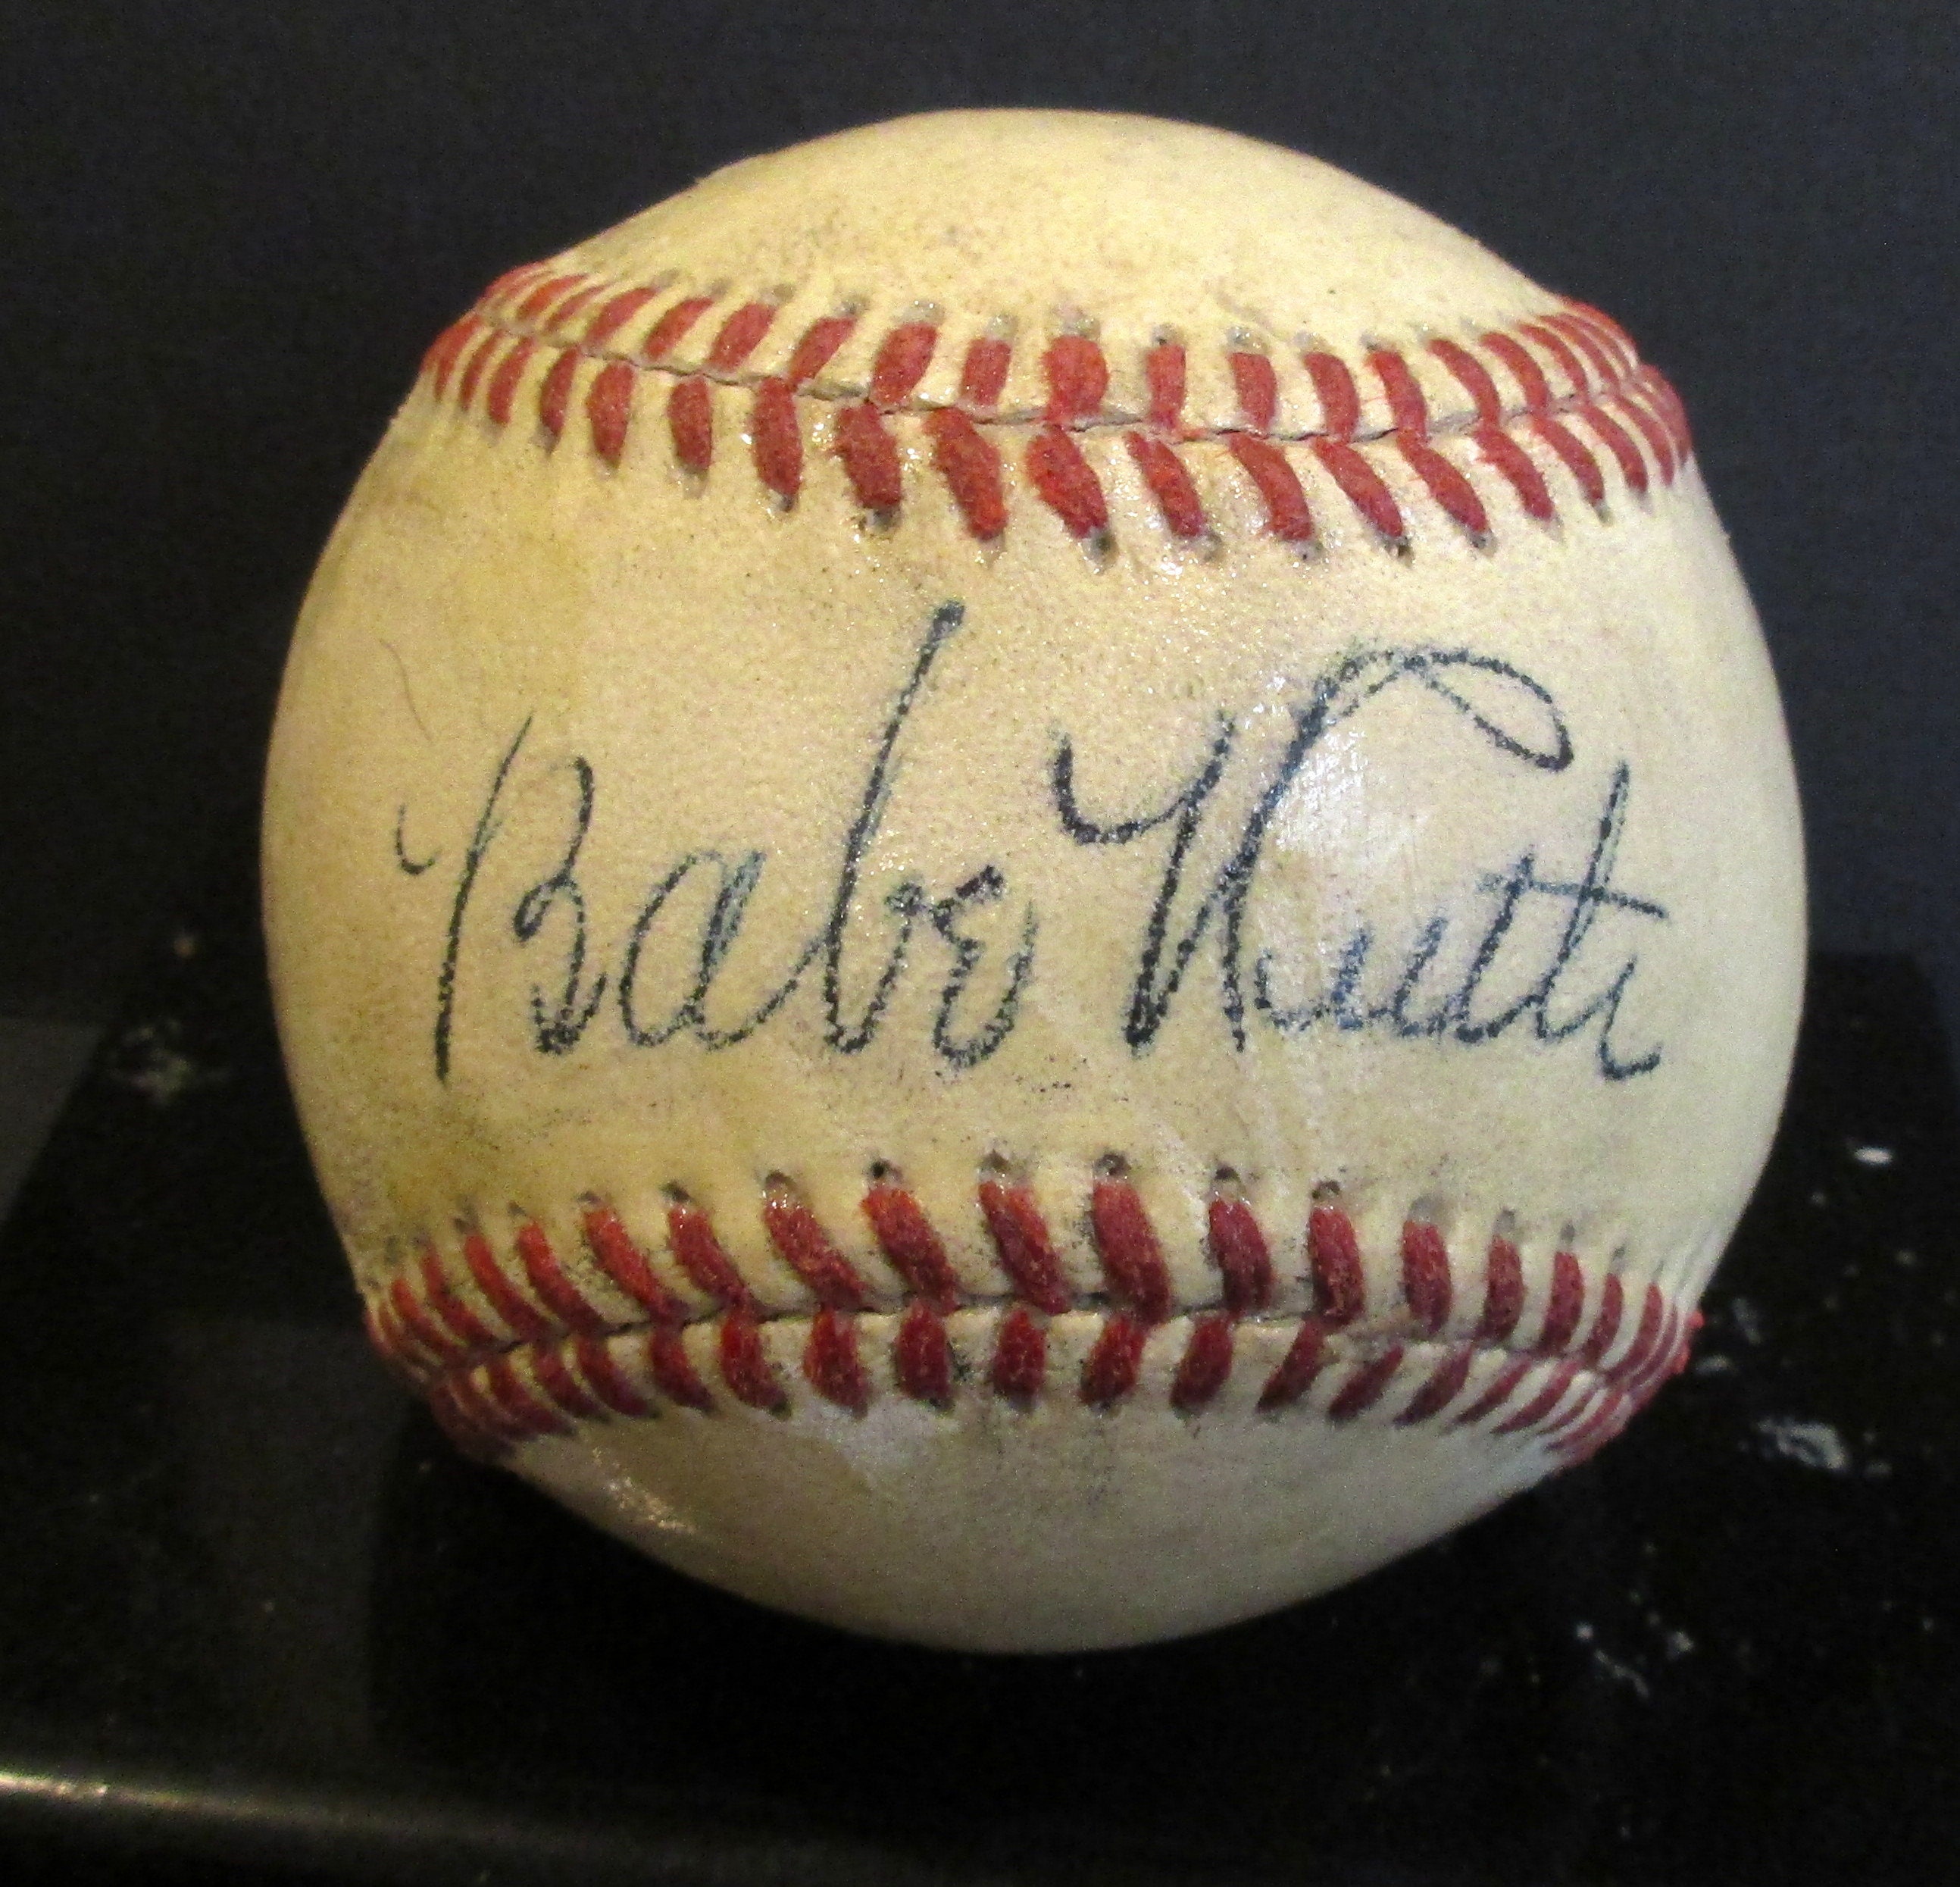 Babe Ruth Replica 1940's Autographed Baseball 